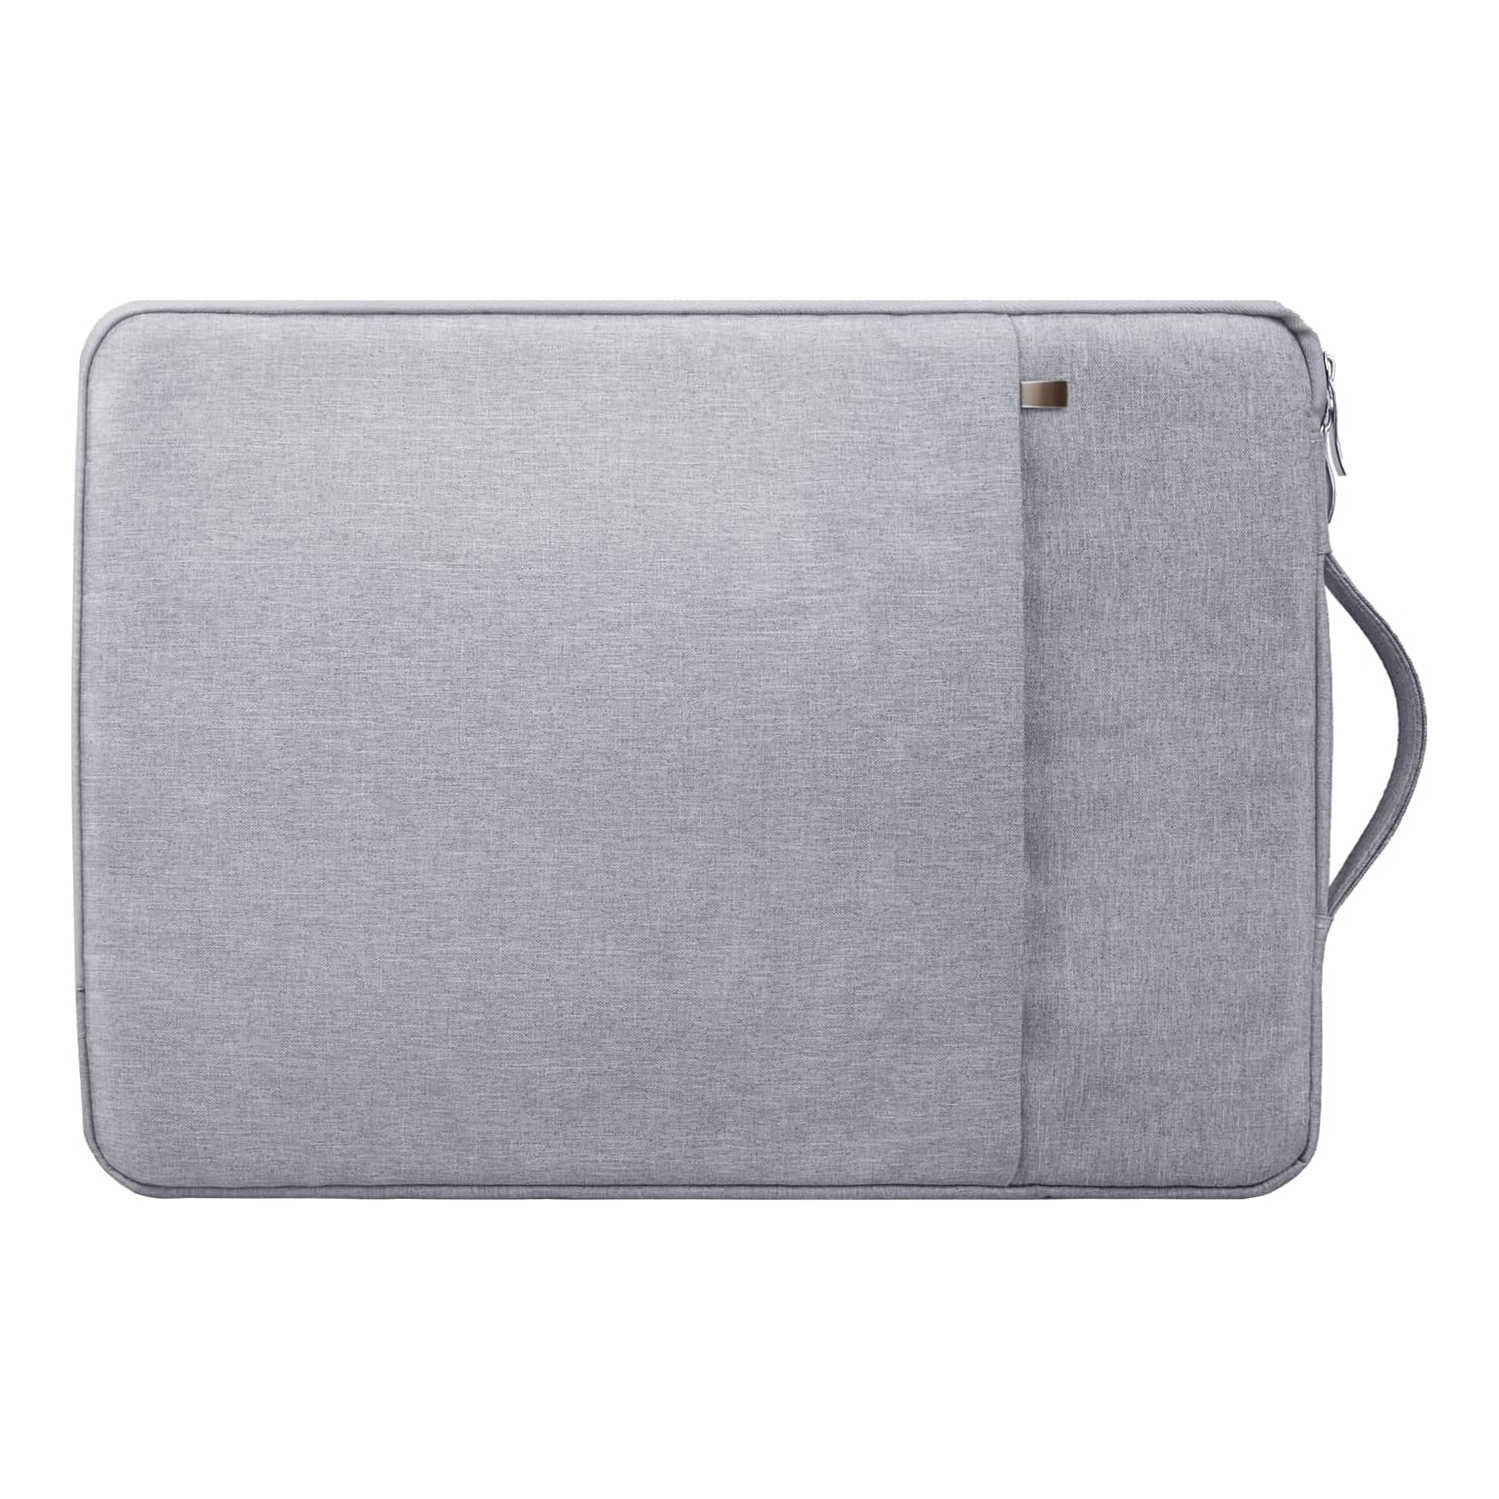 Laptop Sleeve Case 16 Inch Specially for New 16" MacBook Pro M1 Pro/Max A2485 A2141 2021-2019, Protective